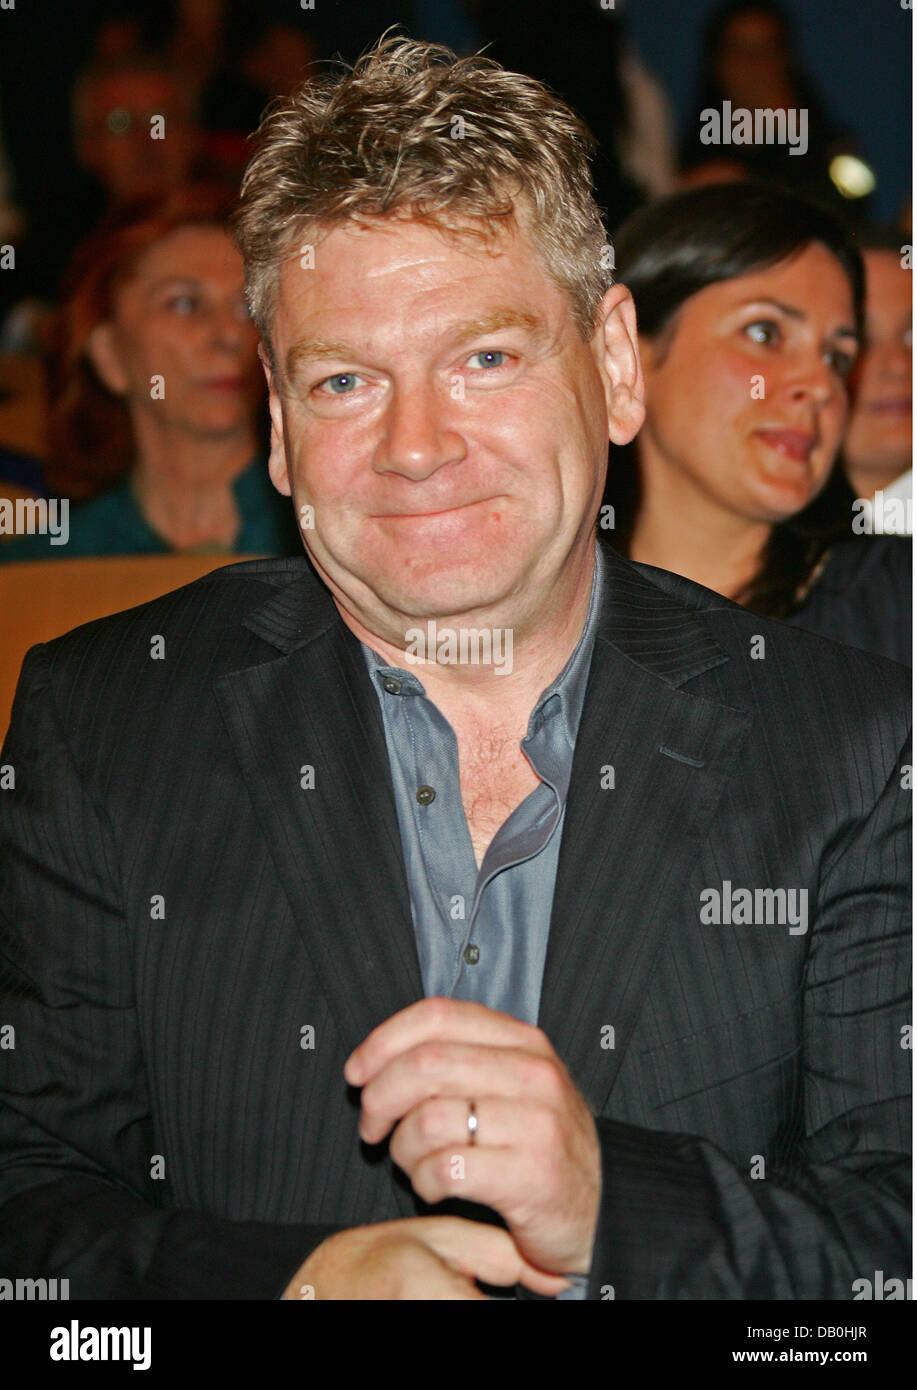 Northern Ireland born director Kenneth Branagh smiles to the camera before the premiere of his film 'Sleuth' at the 64th Internatioal Film Festival in Venice, Italy, 30 August 2007. Photo: Hubert Boesl Stock Photo